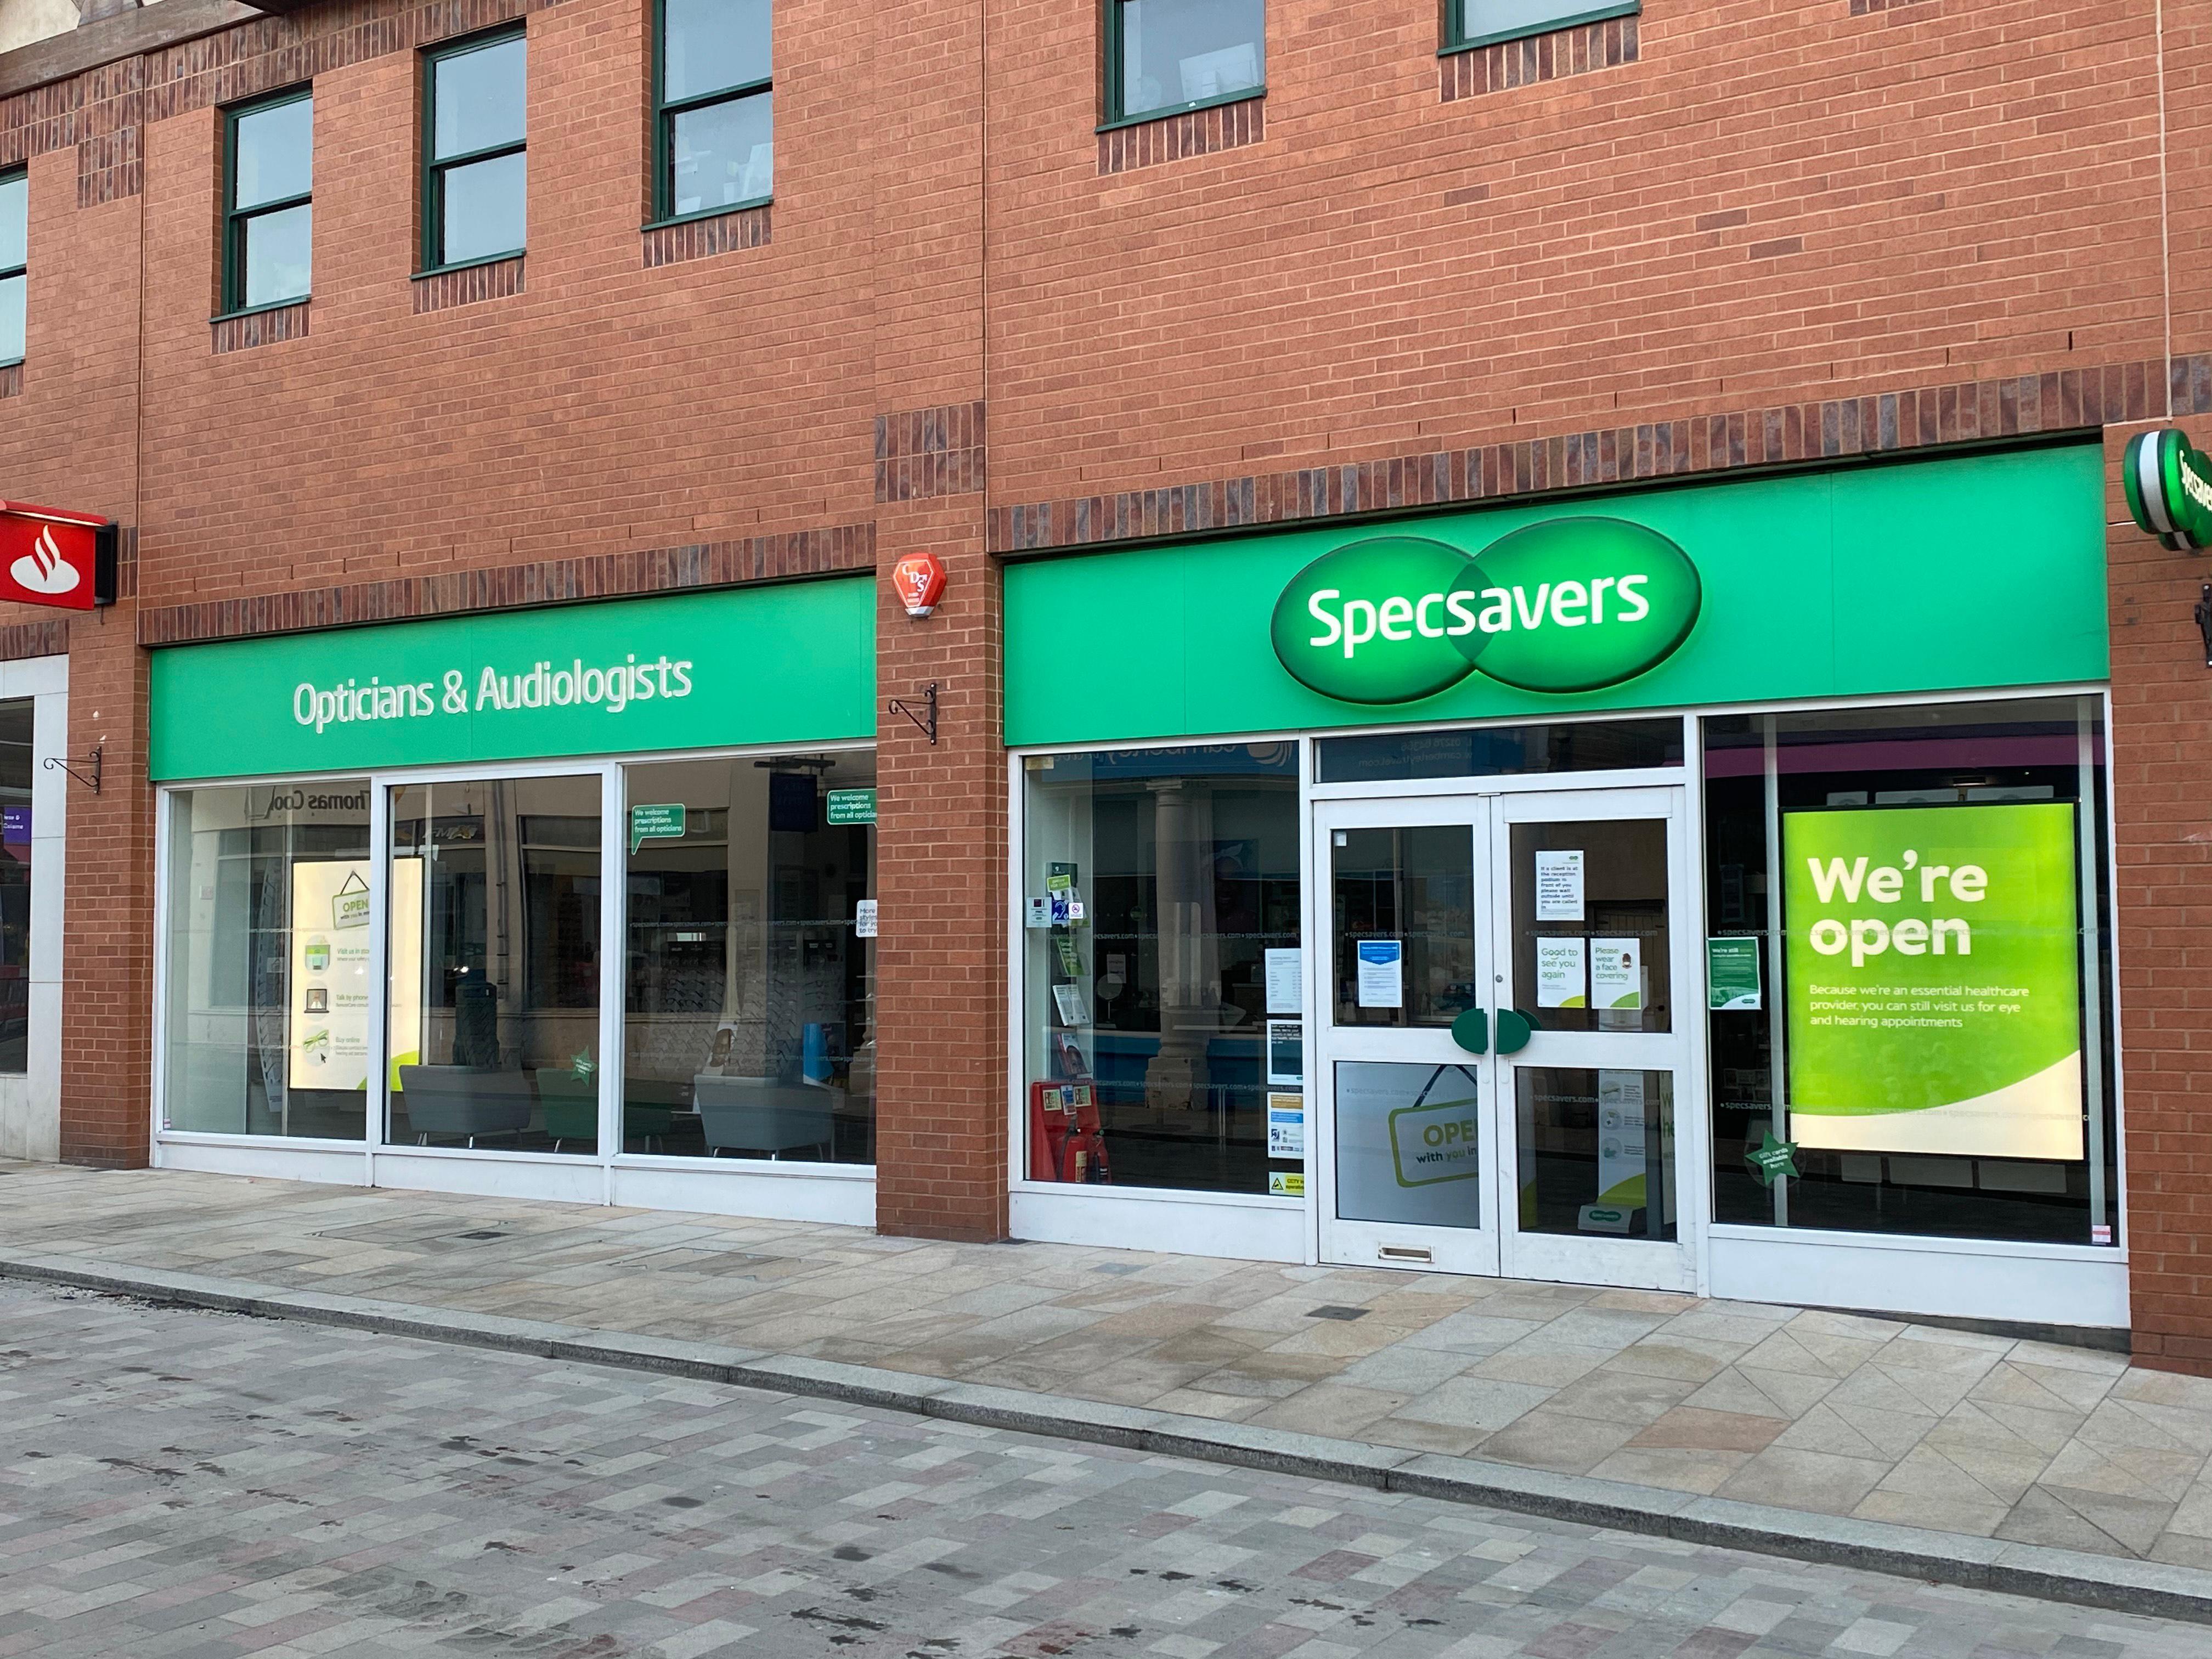 Images Specsavers Opticians and Audiologists - Camberley